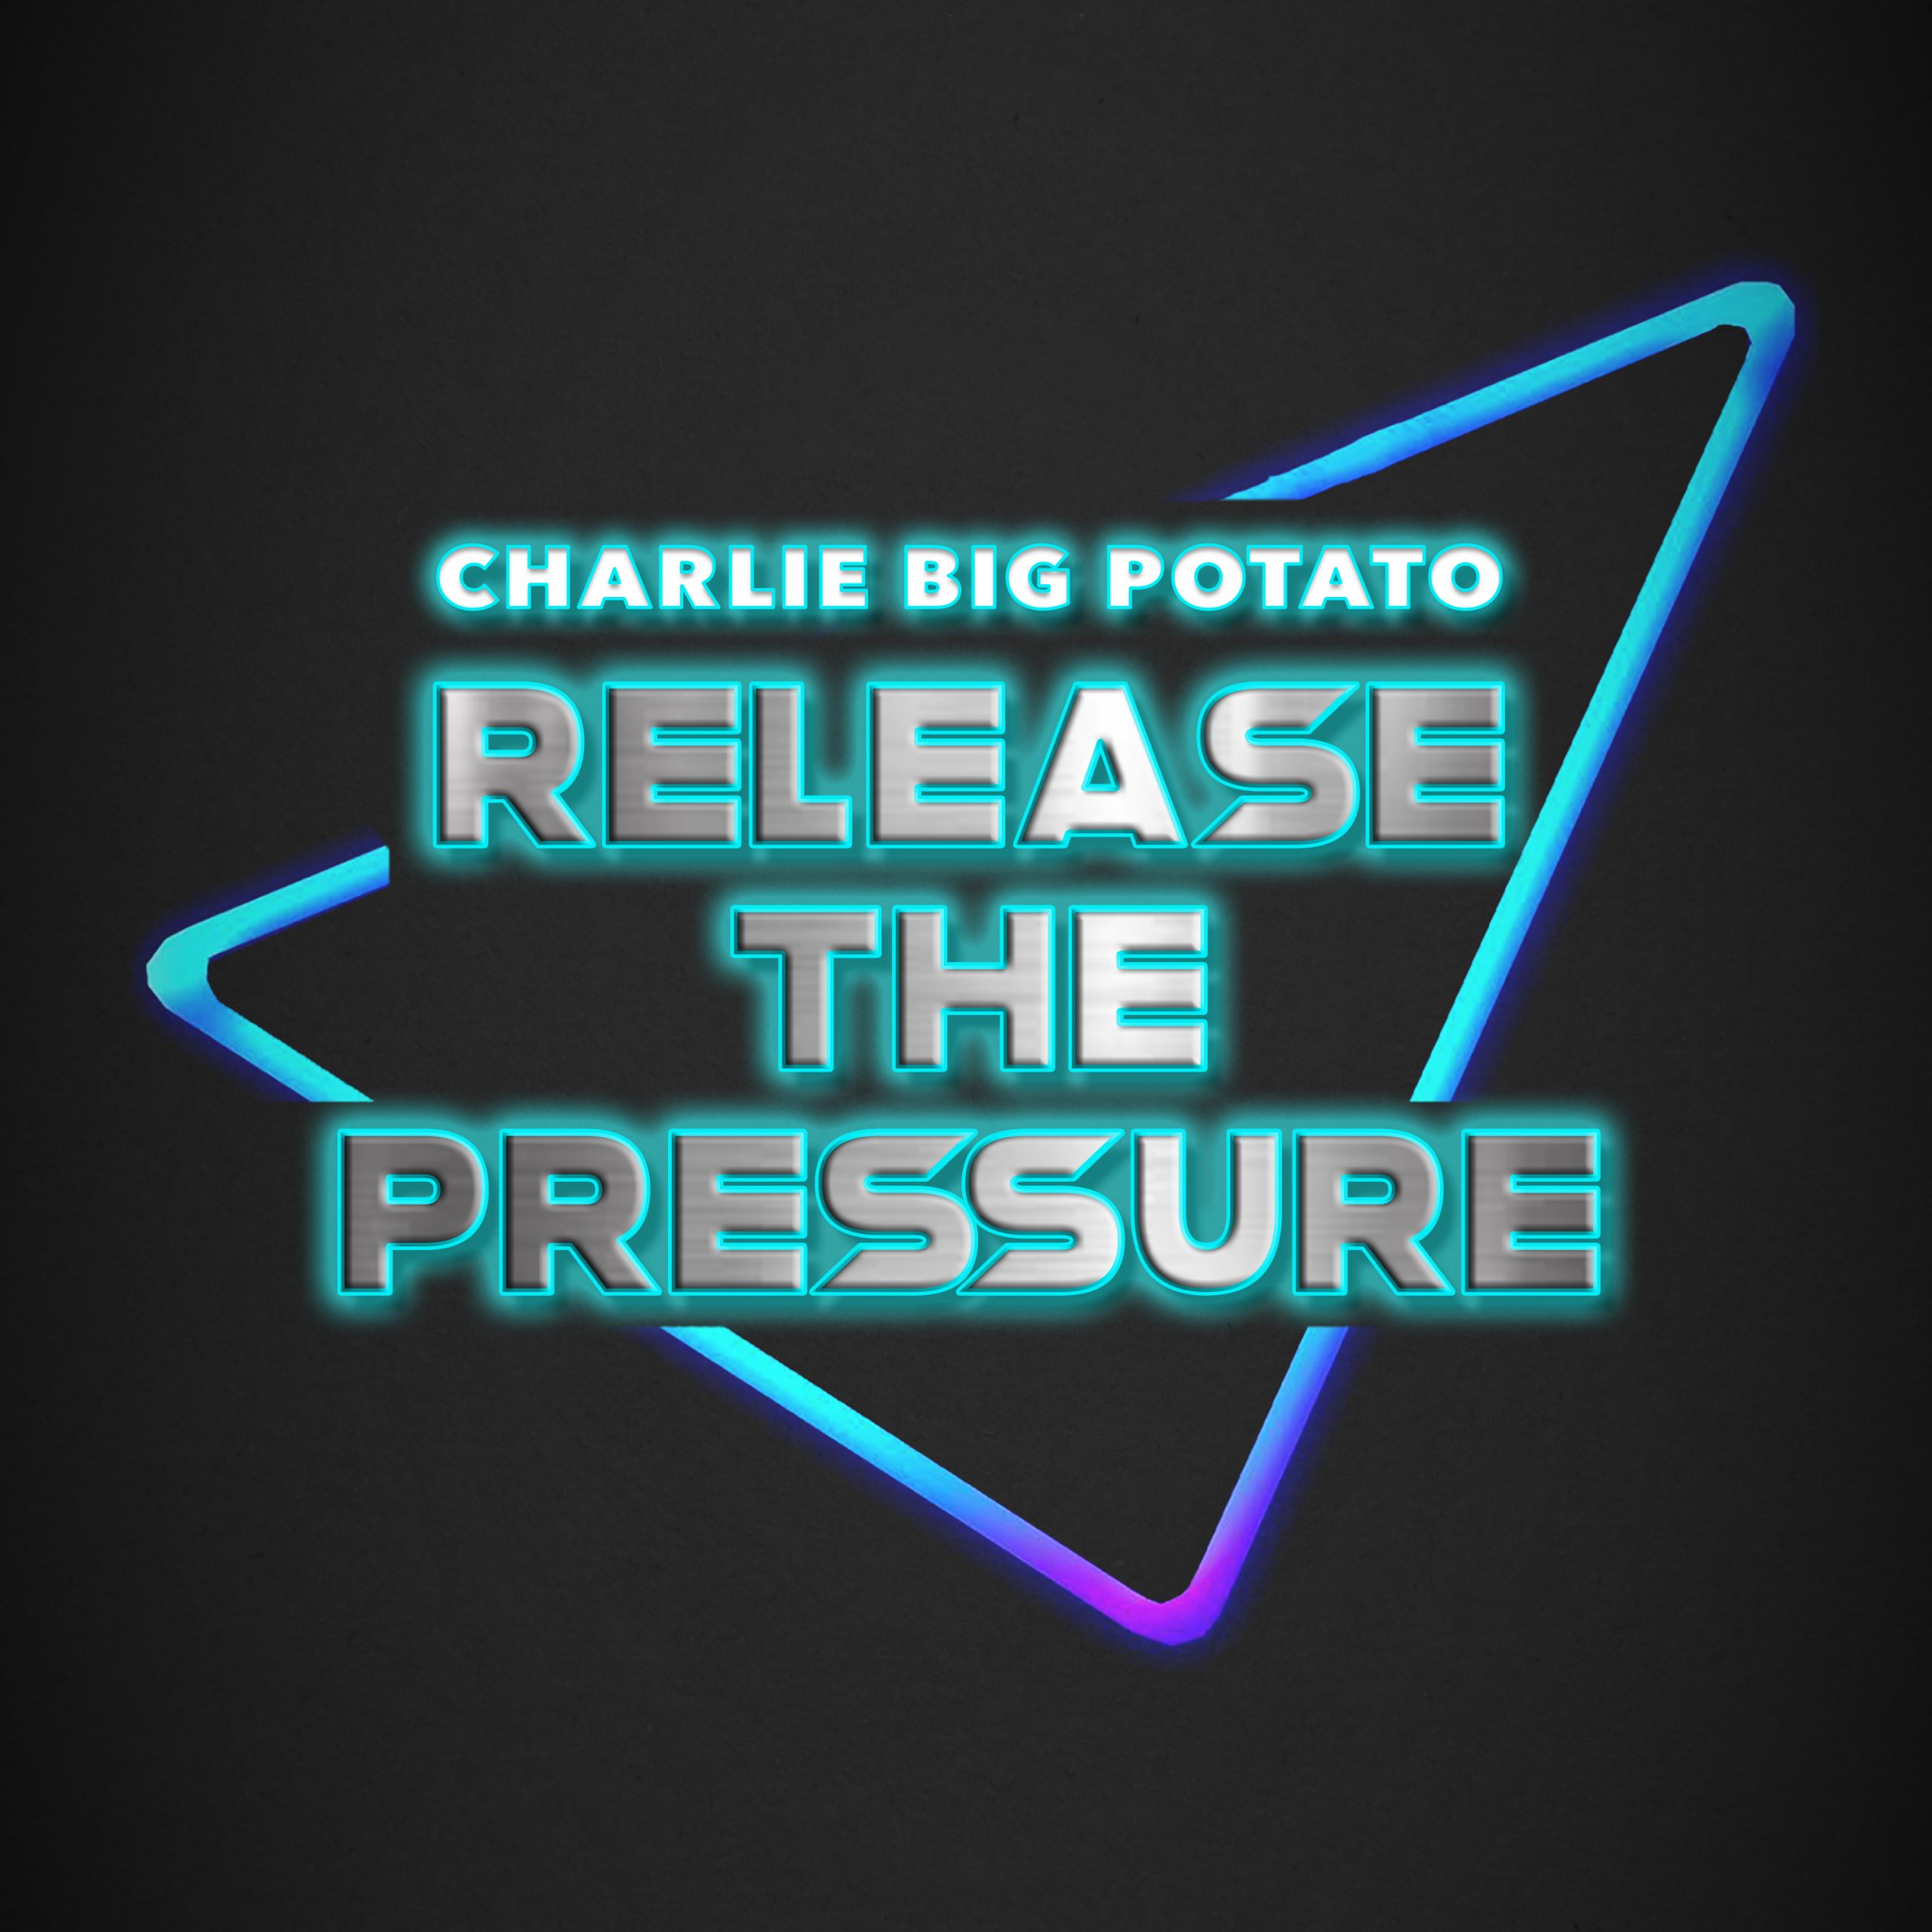 Charlie Big Potato AKA Charles Hope drops an inspirational dance anthem with ‘Release The Pressure’